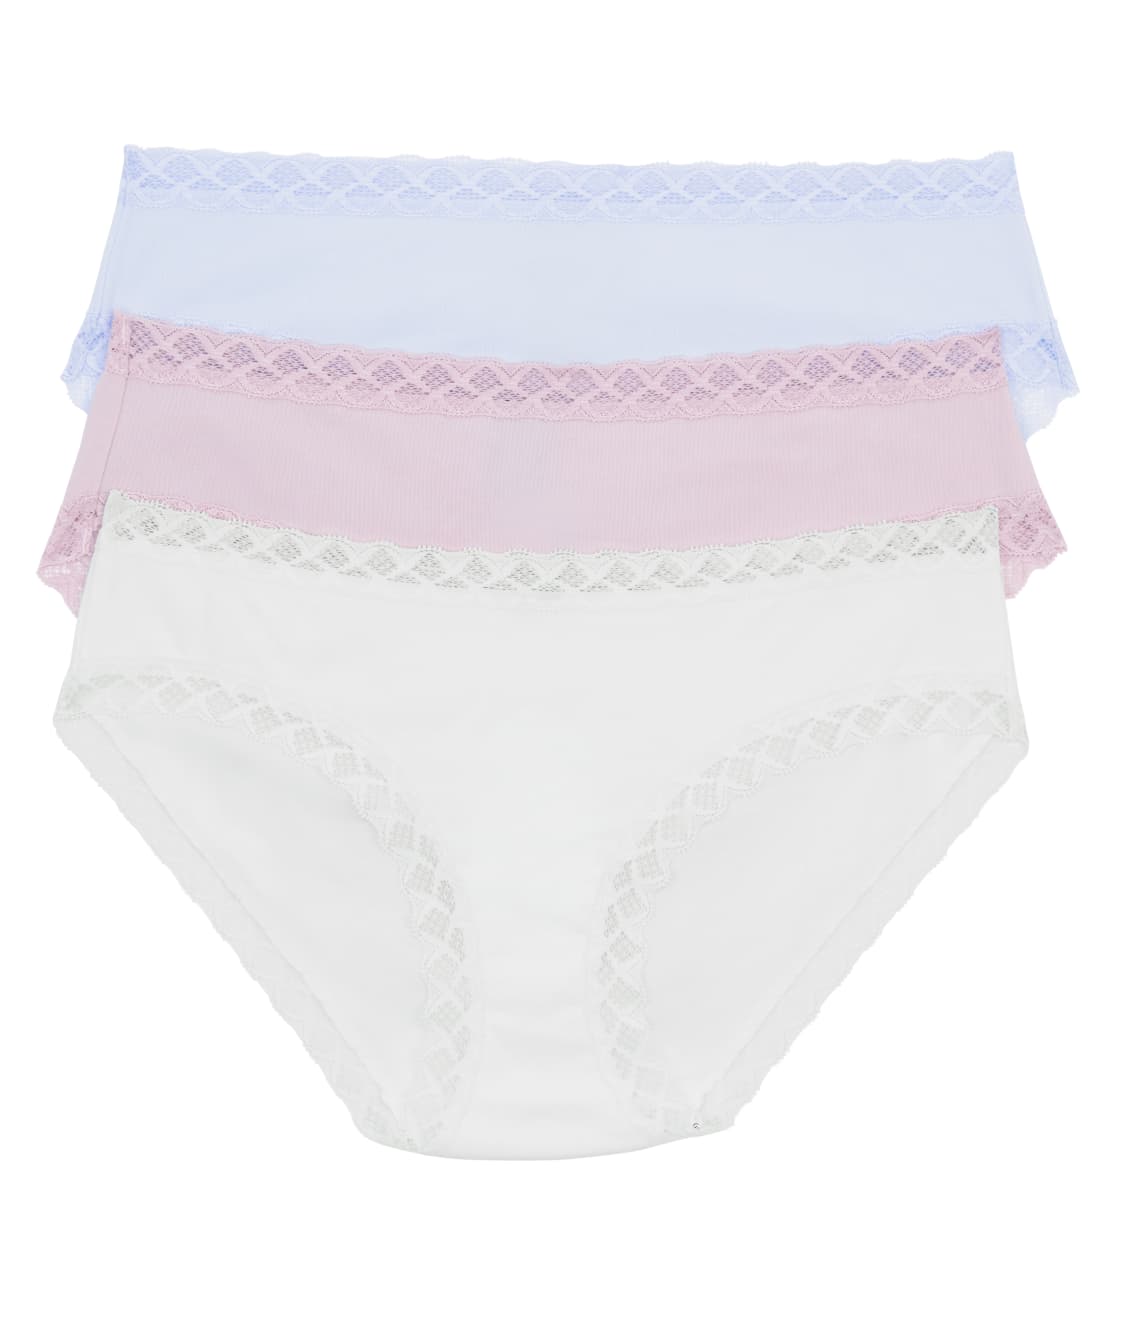 Natori Bliss Cotton Girl Brief 3-Pack & Reviews | Bare Necessities ...